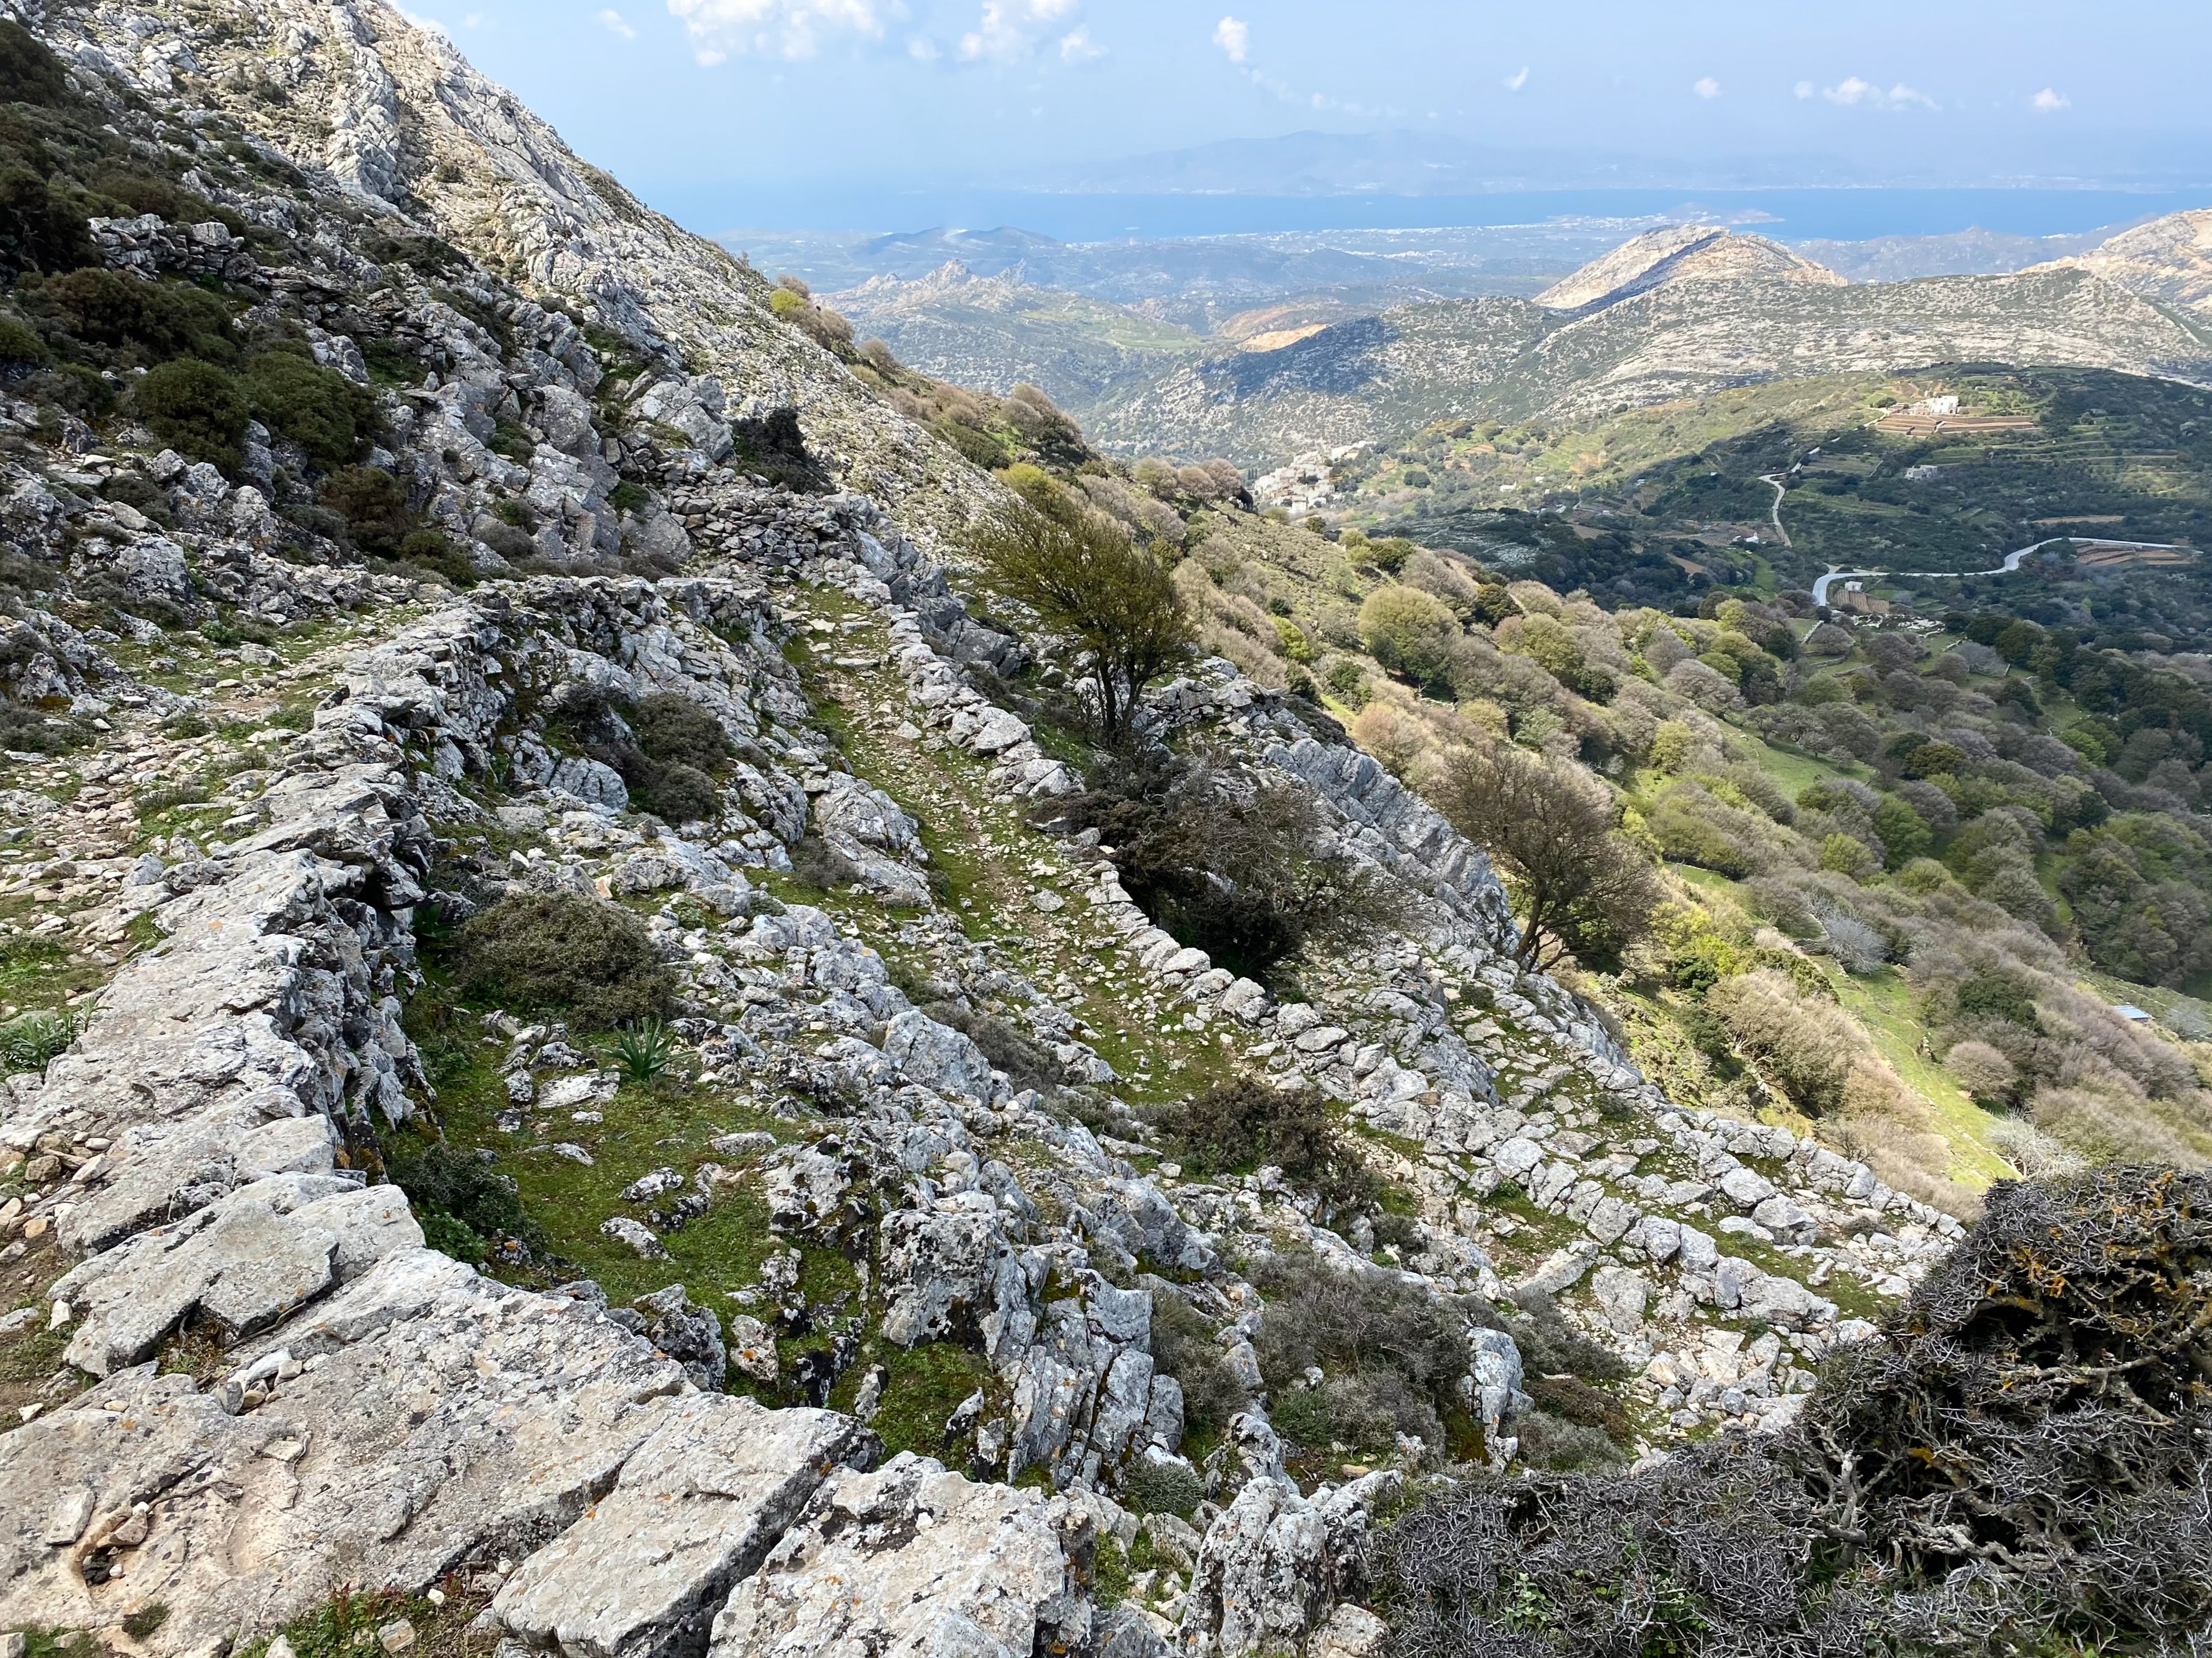 See a different side to Naxos by walking its rural trails